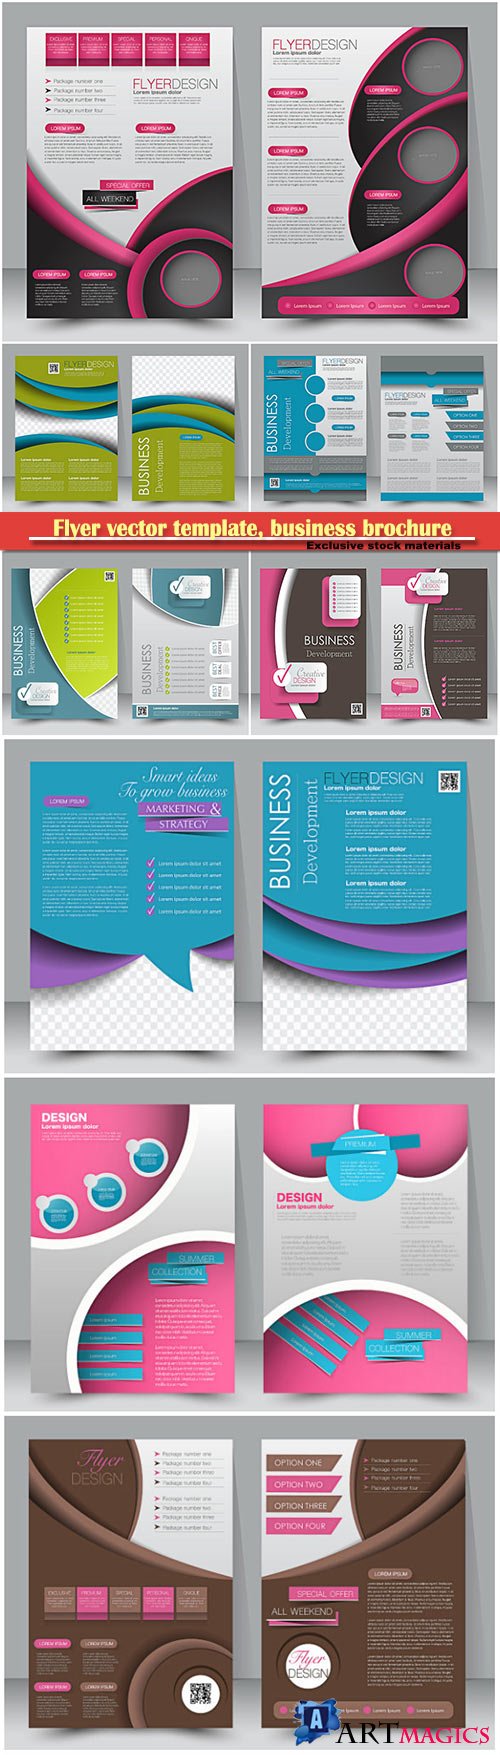 Flyer vector template, business brochure, magazine cover # 8